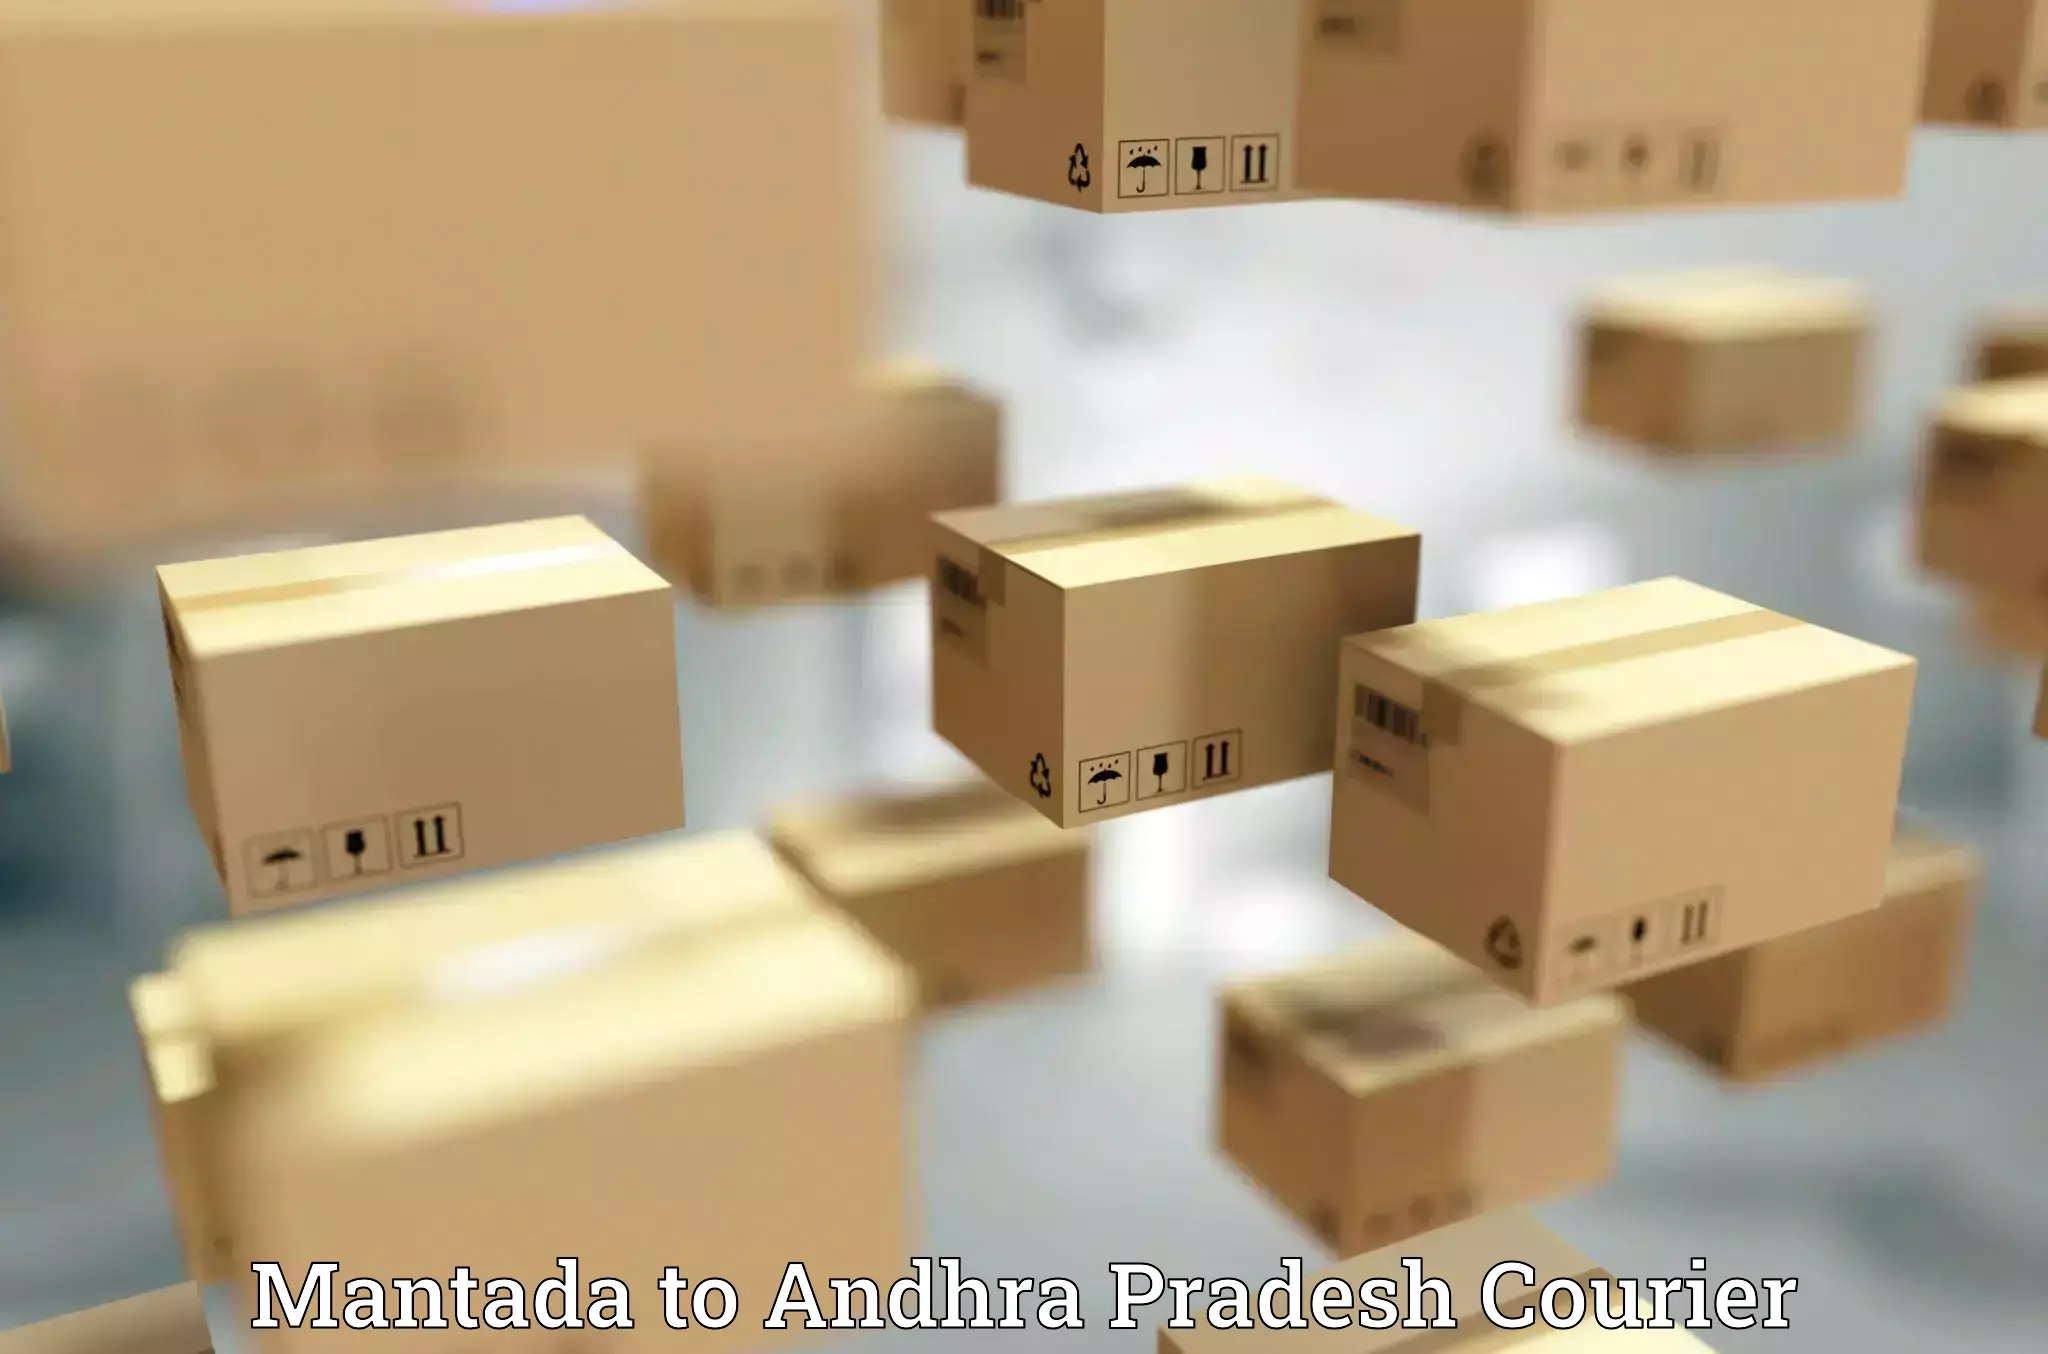 Reliable courier services Mantada to Visakhapatnam Port